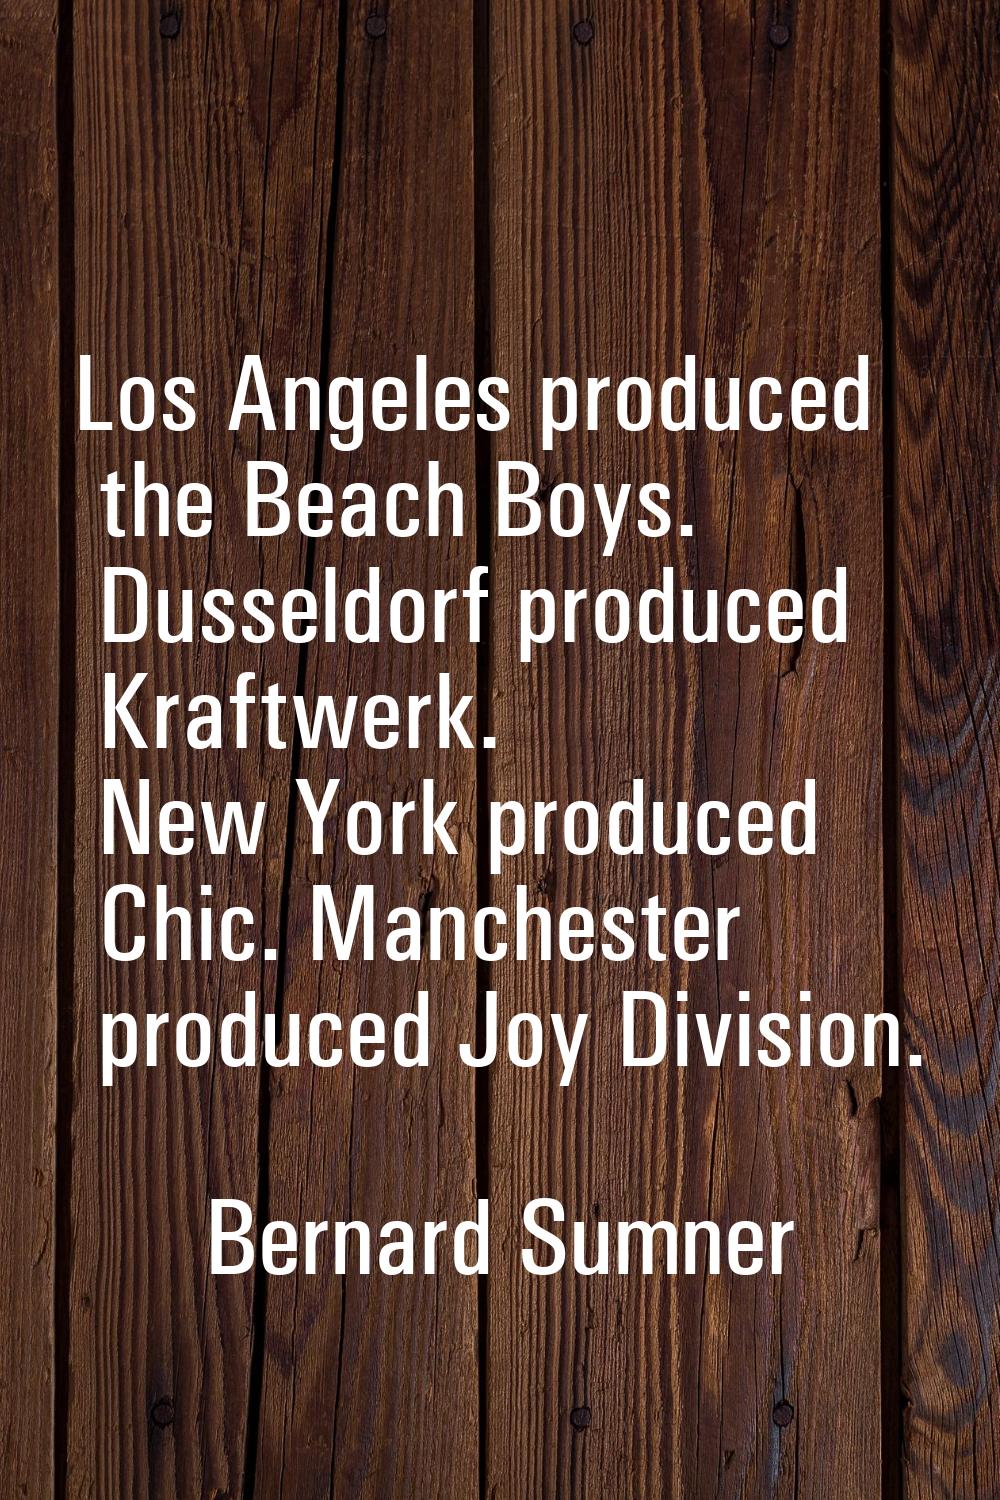 Los Angeles produced the Beach Boys. Dusseldorf produced Kraftwerk. New York produced Chic. Manches